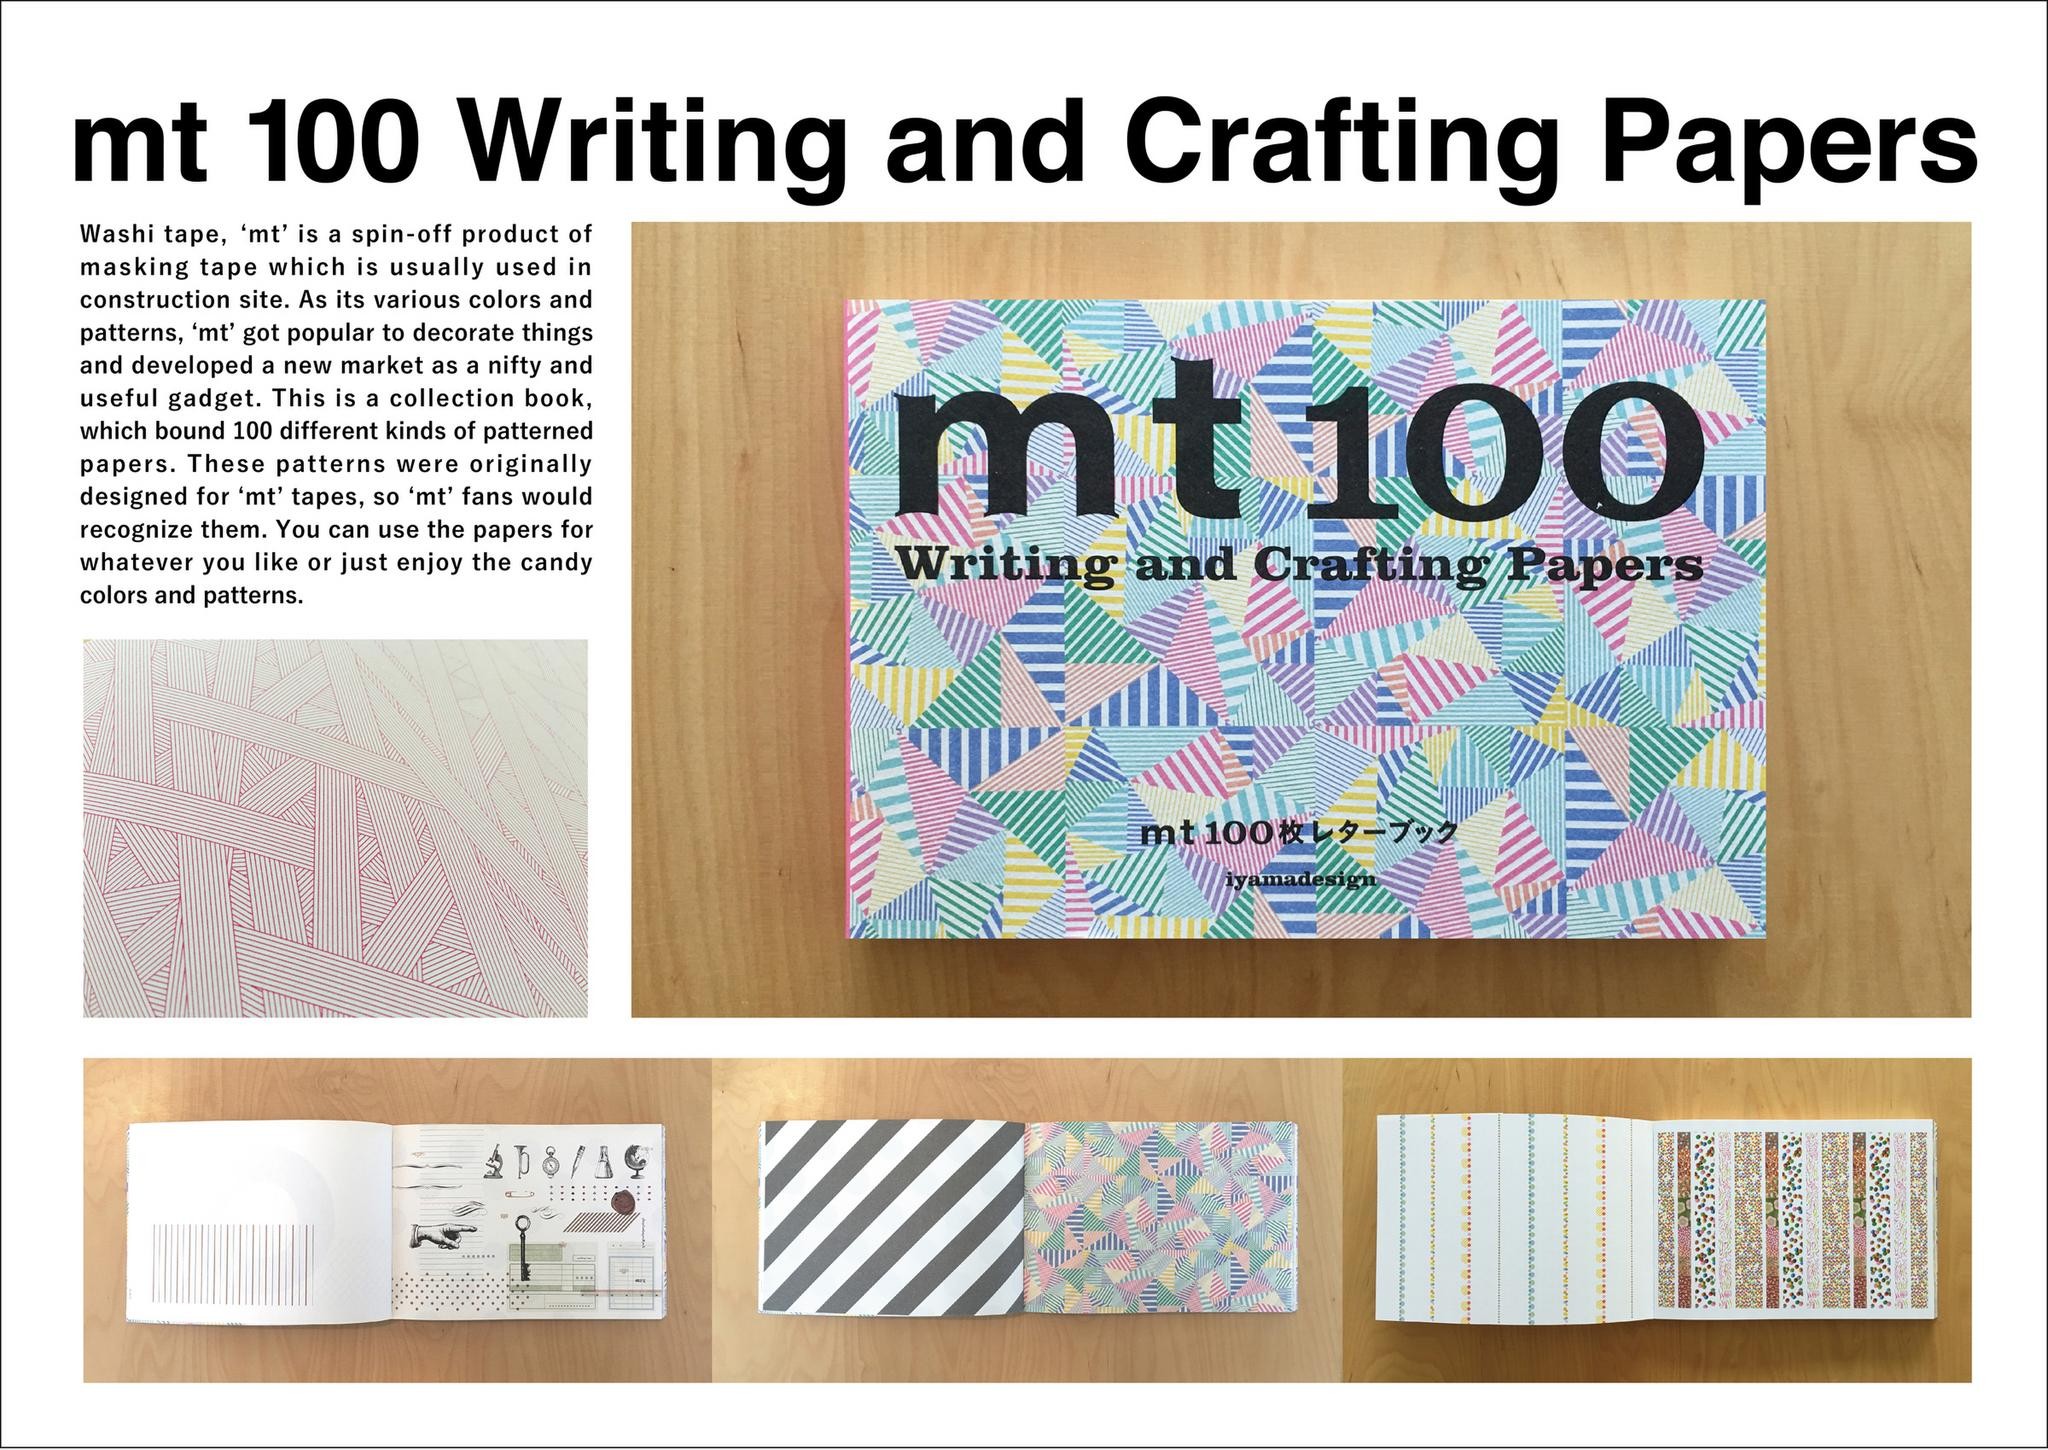 MT 100 WRITING AND CRAFTING PAPERS